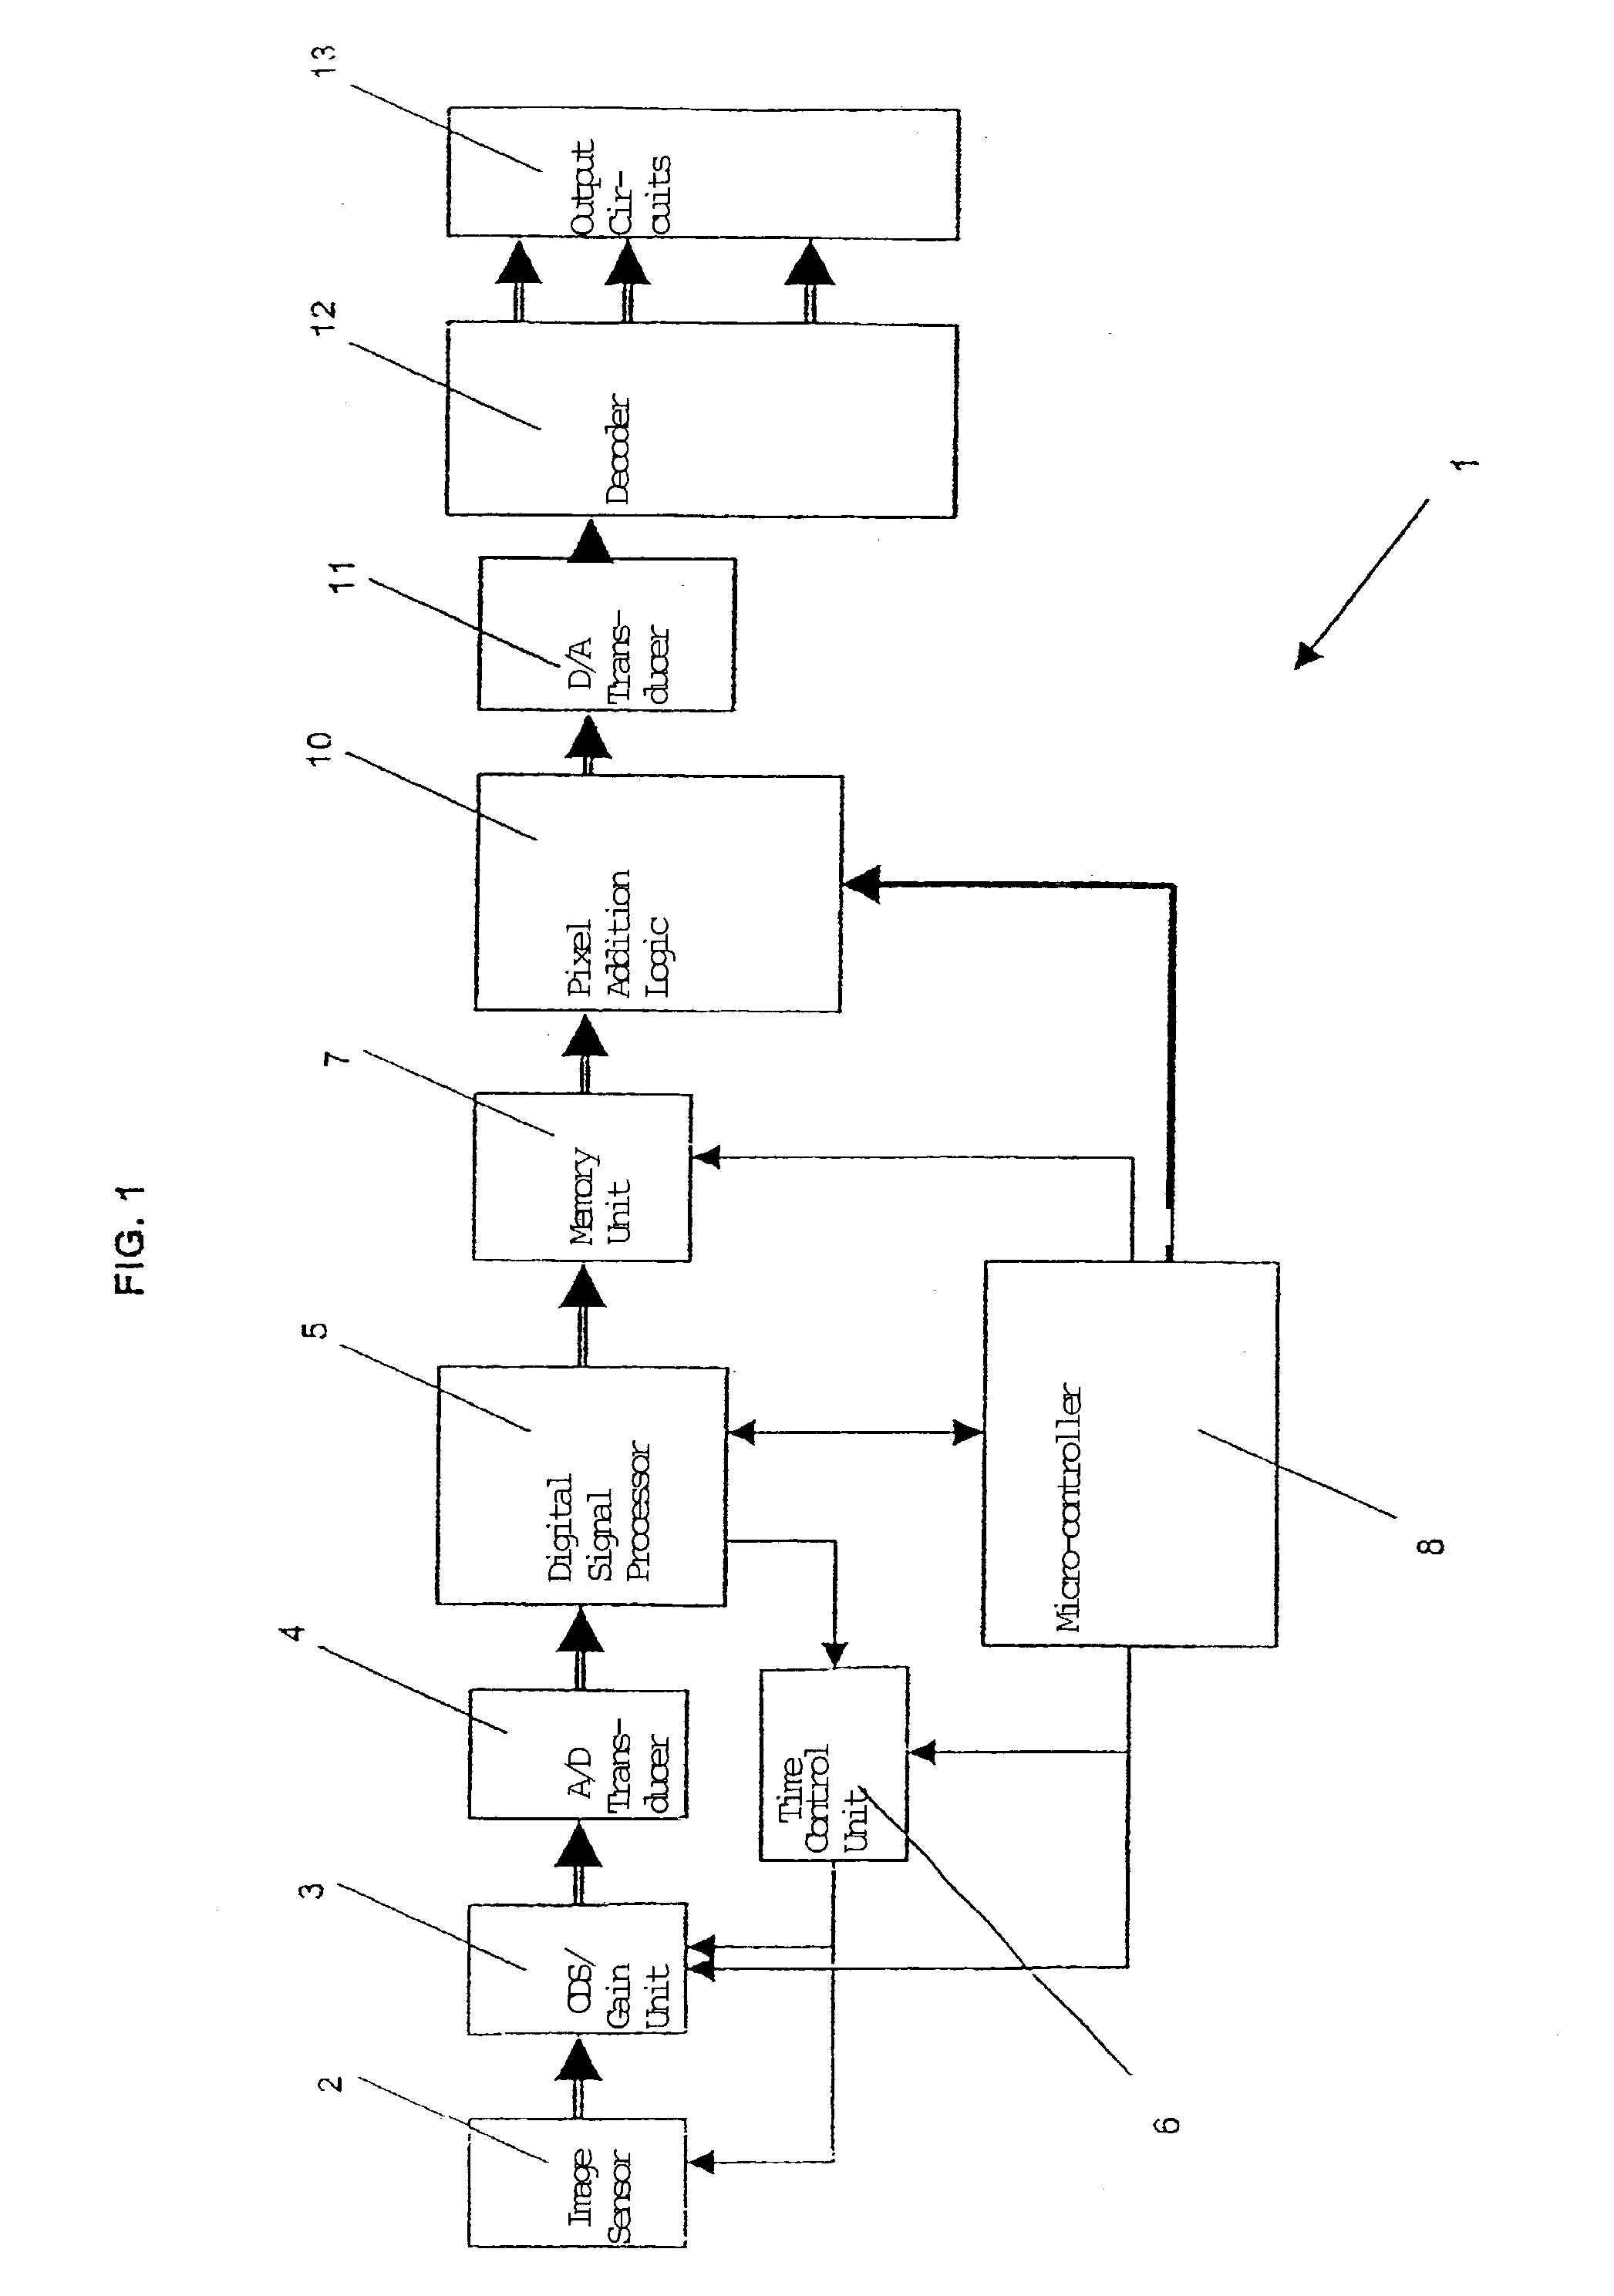 Solid-state video camera and method for brightness control